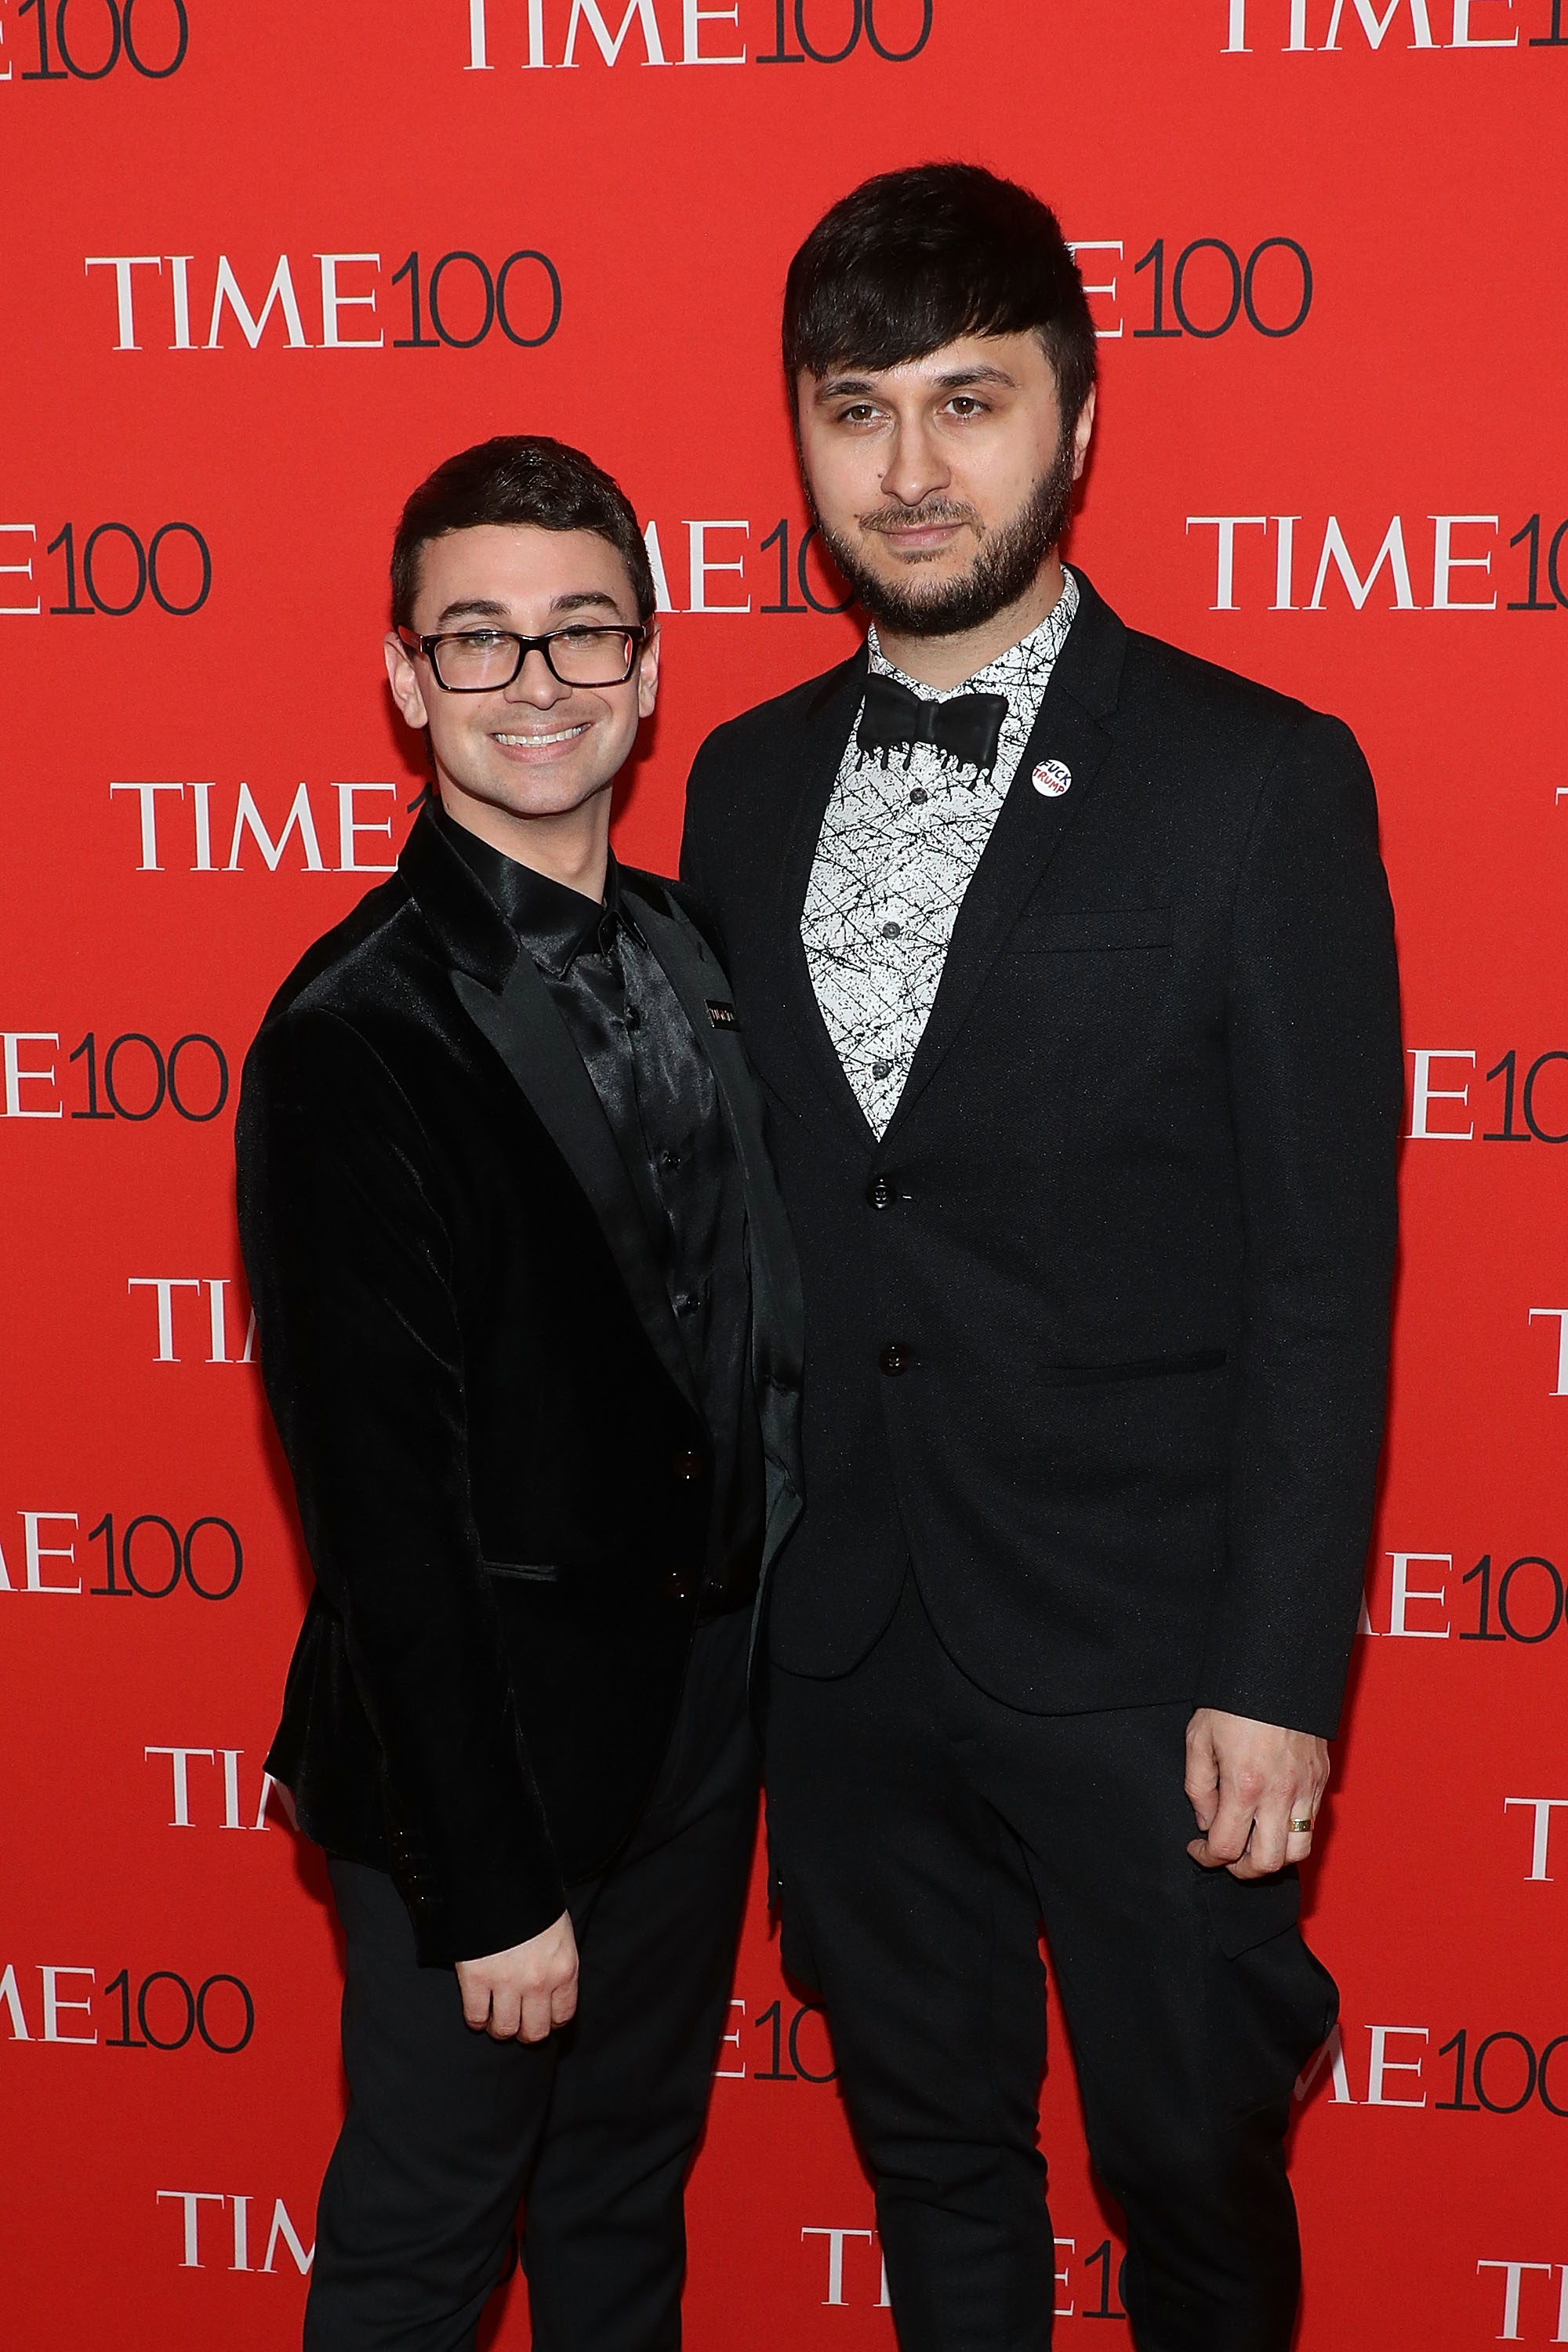 Christian and Brad at a Time 100 event